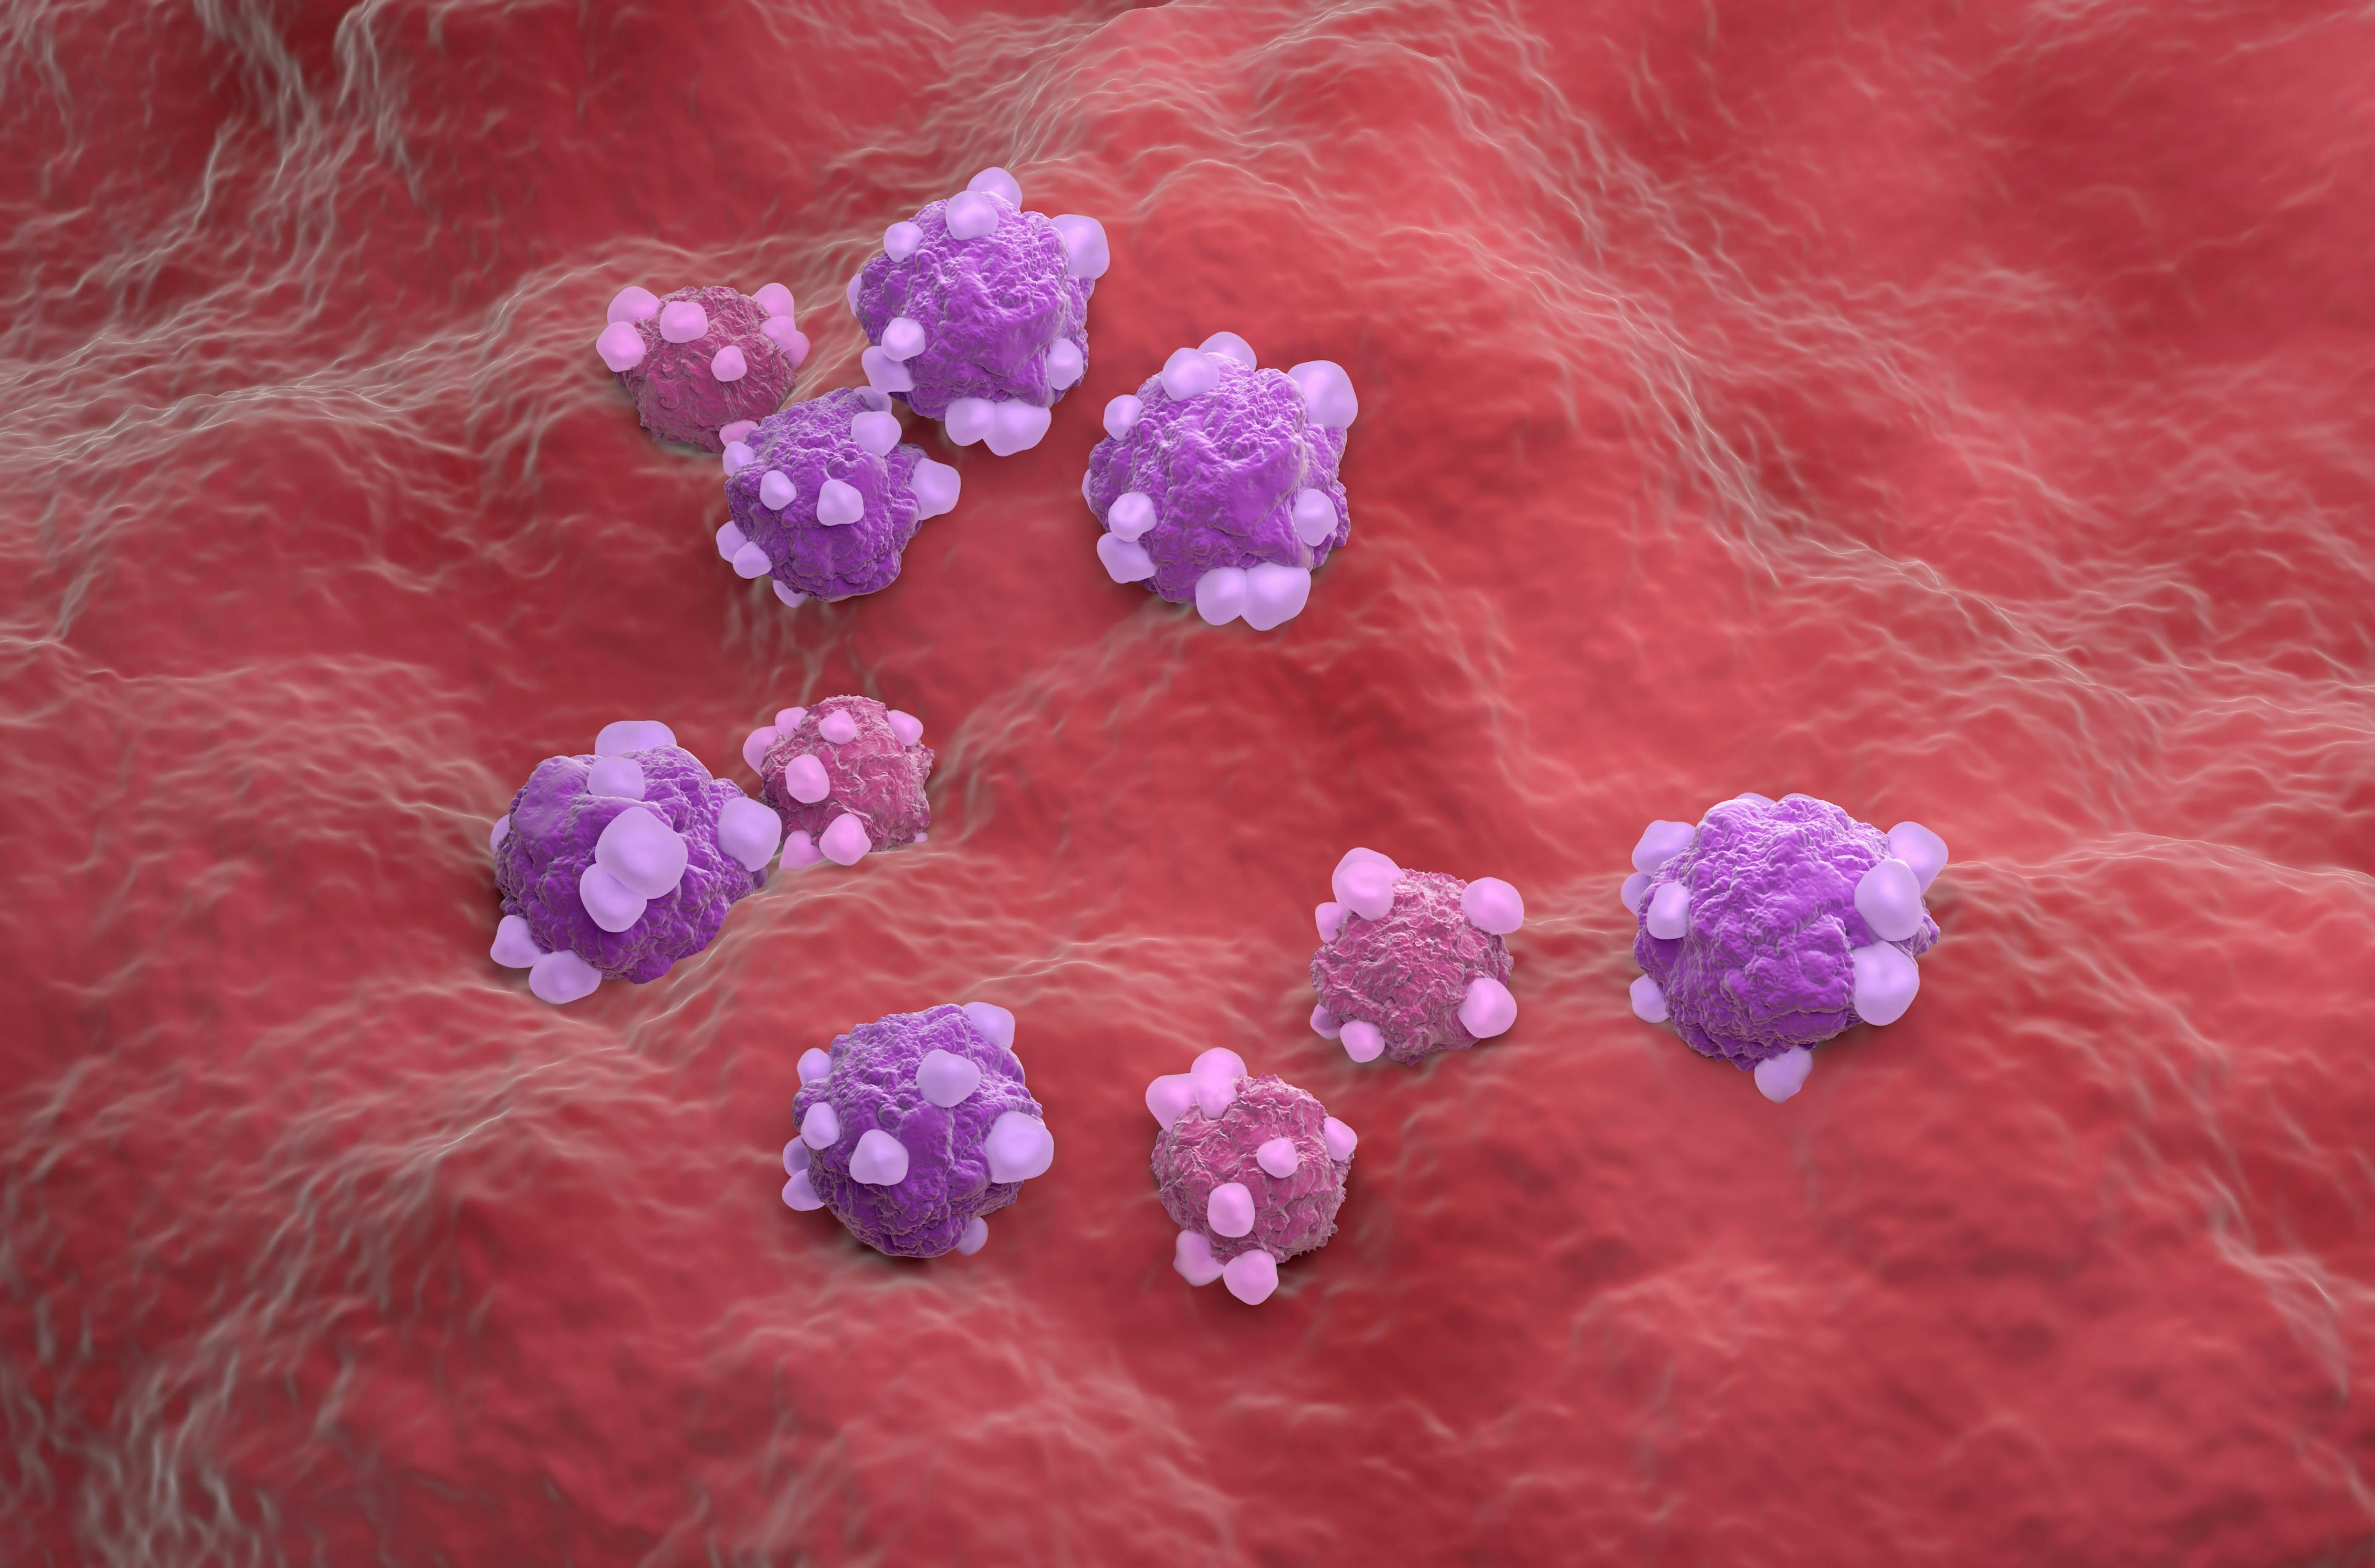 Ovarian cancer cell variations - isometric view 3d illustration | Image Credit: © LASZLO -www.stock.adobe.com